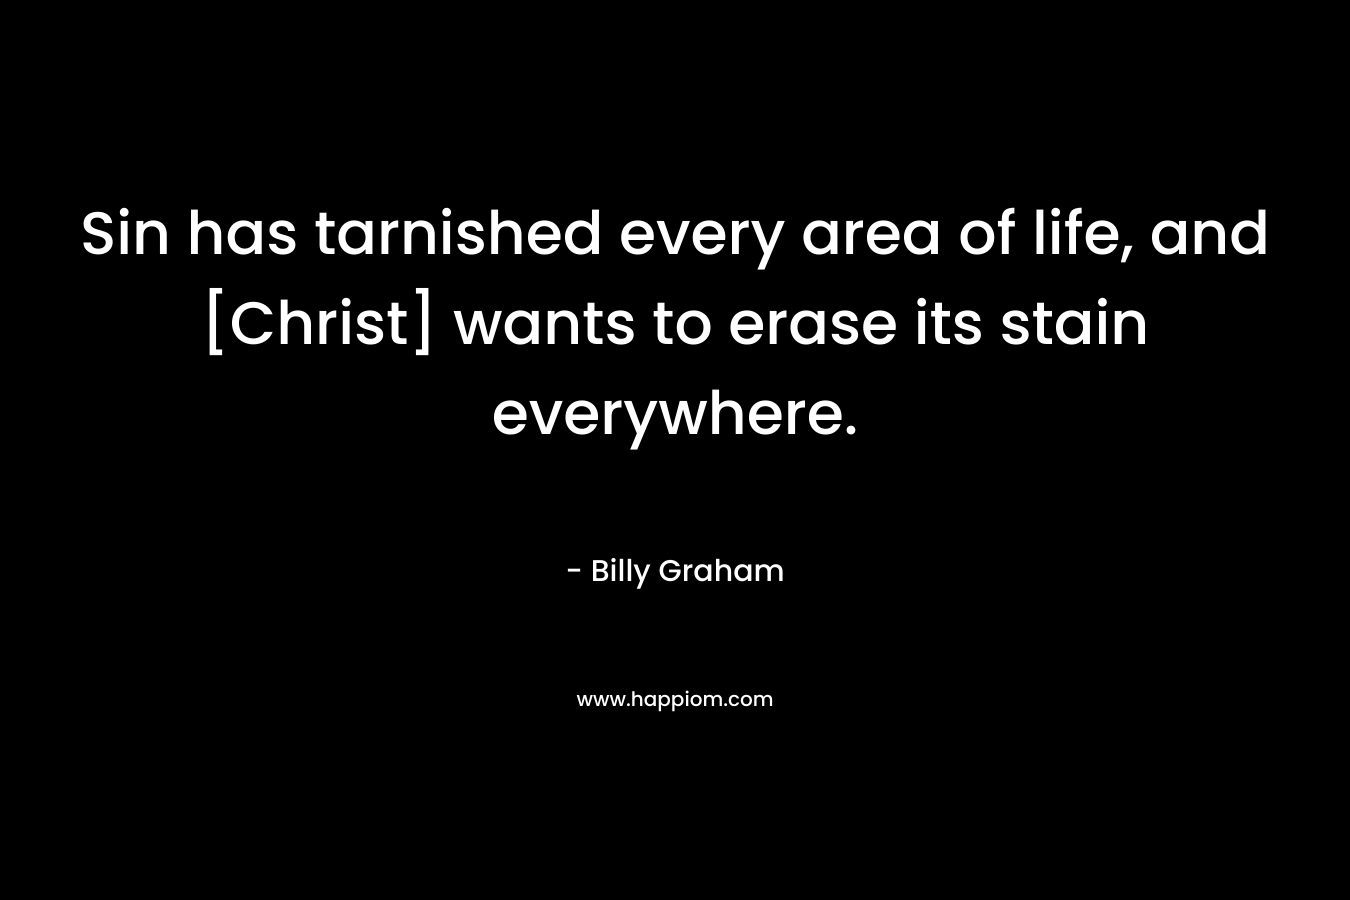 Sin has tarnished every area of life, and [Christ] wants to erase its stain everywhere. – Billy Graham